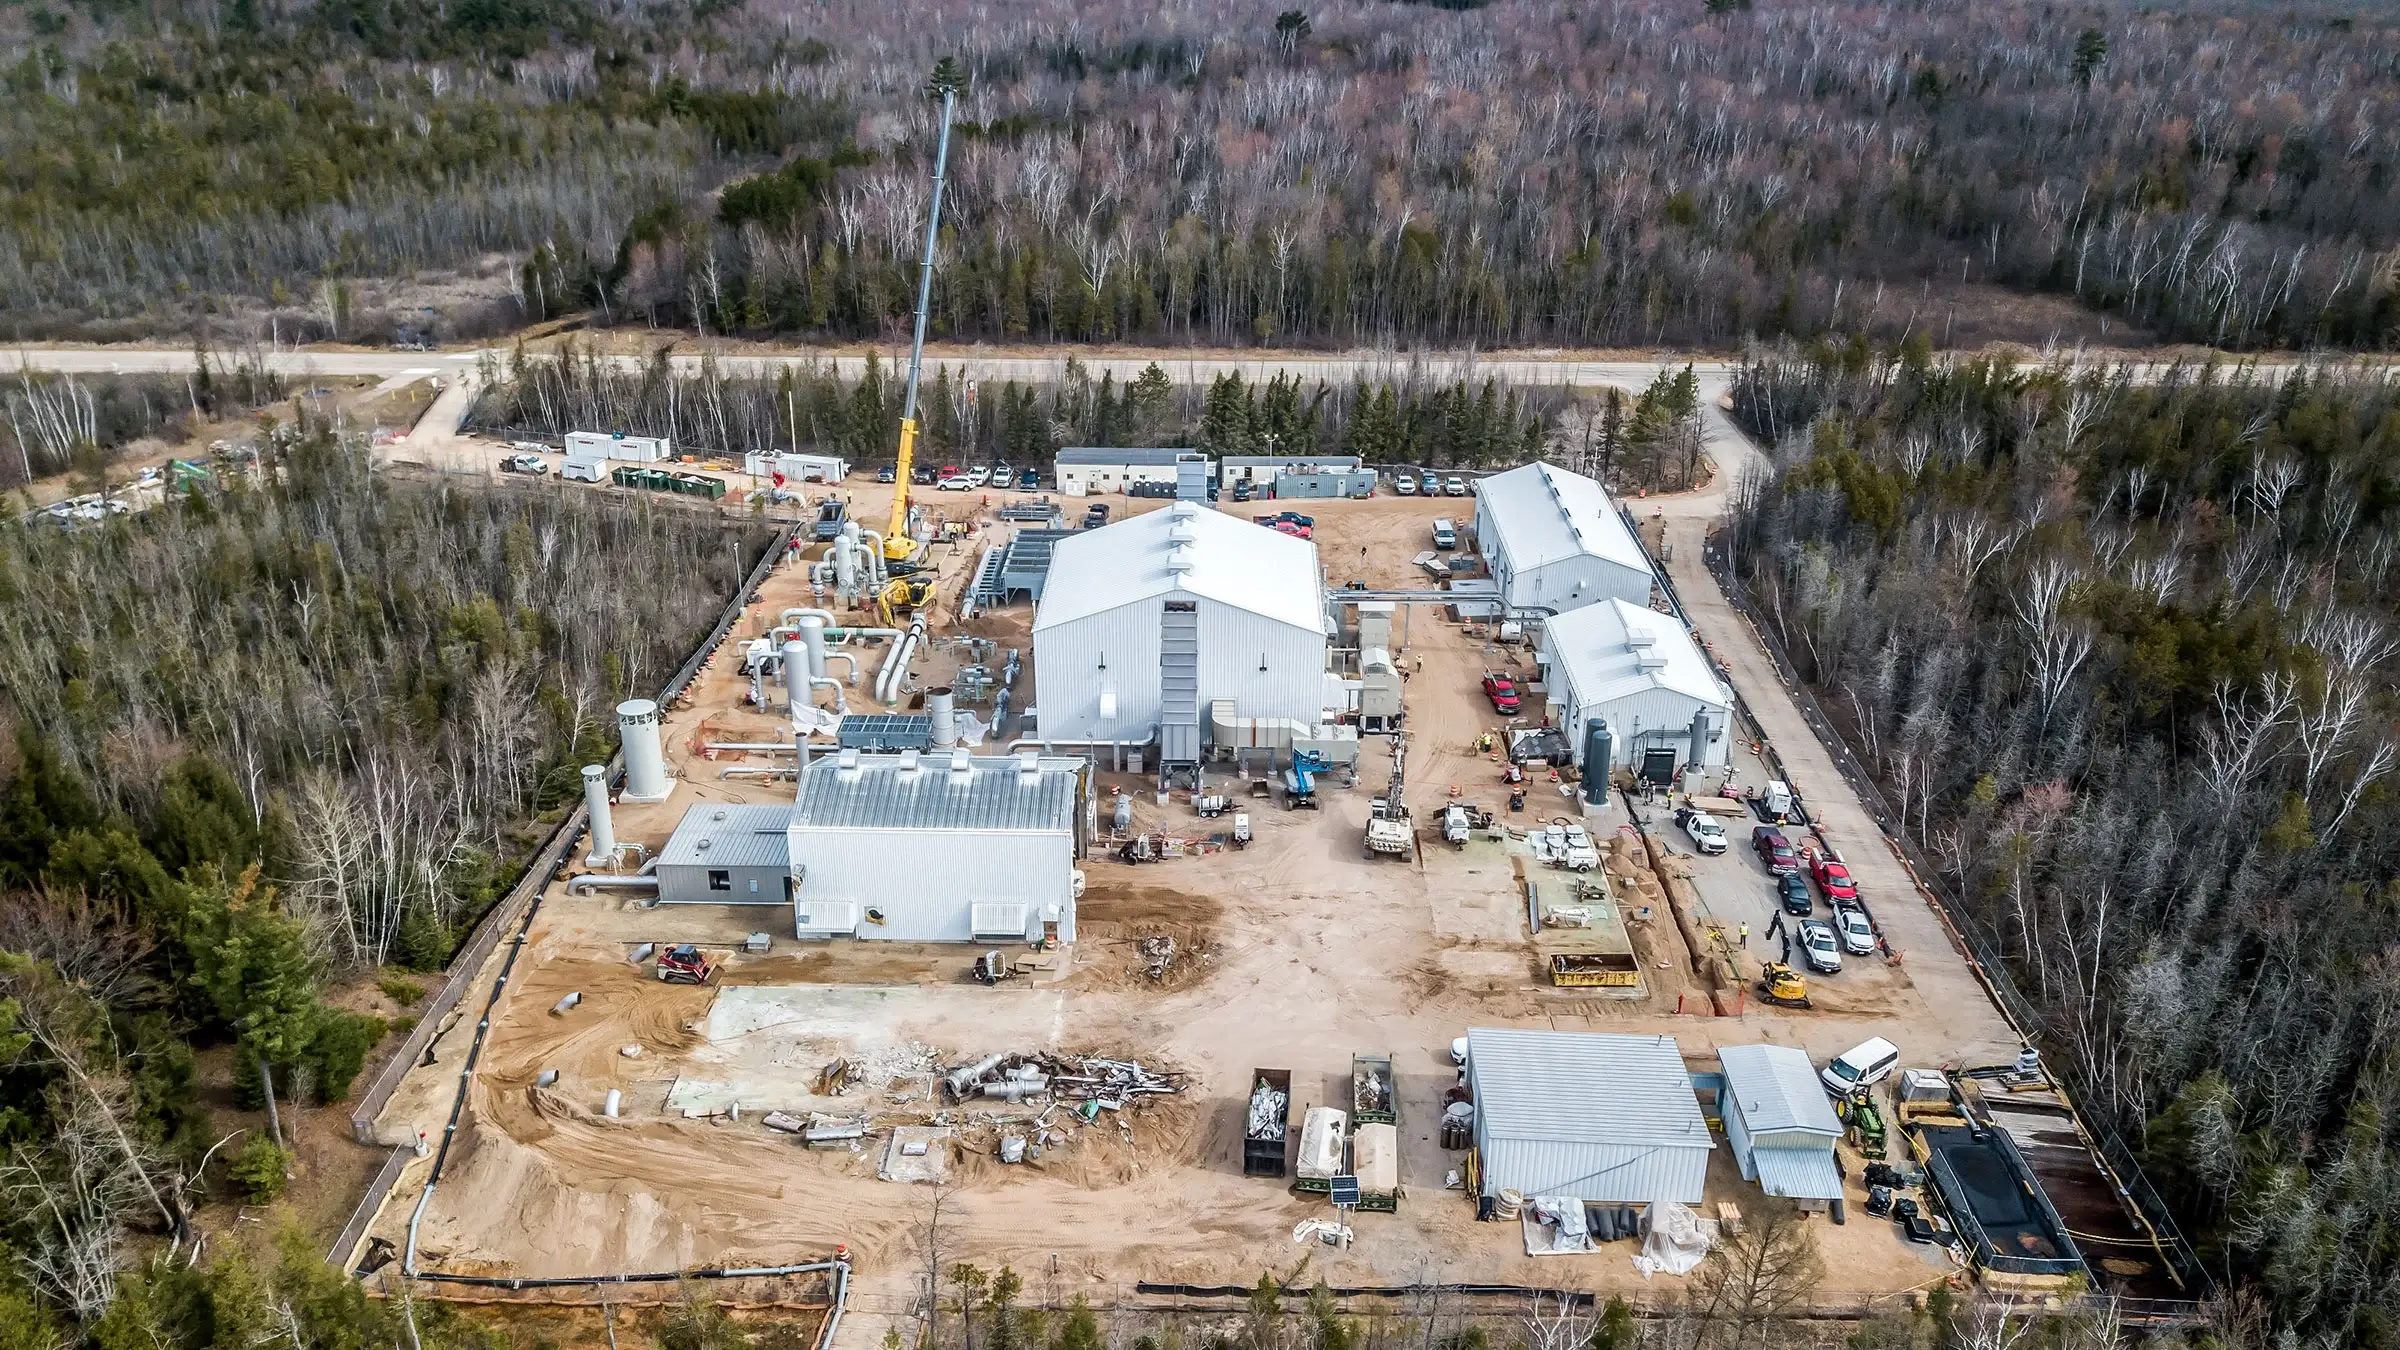 A compressor station in a heavily wooded rural area.